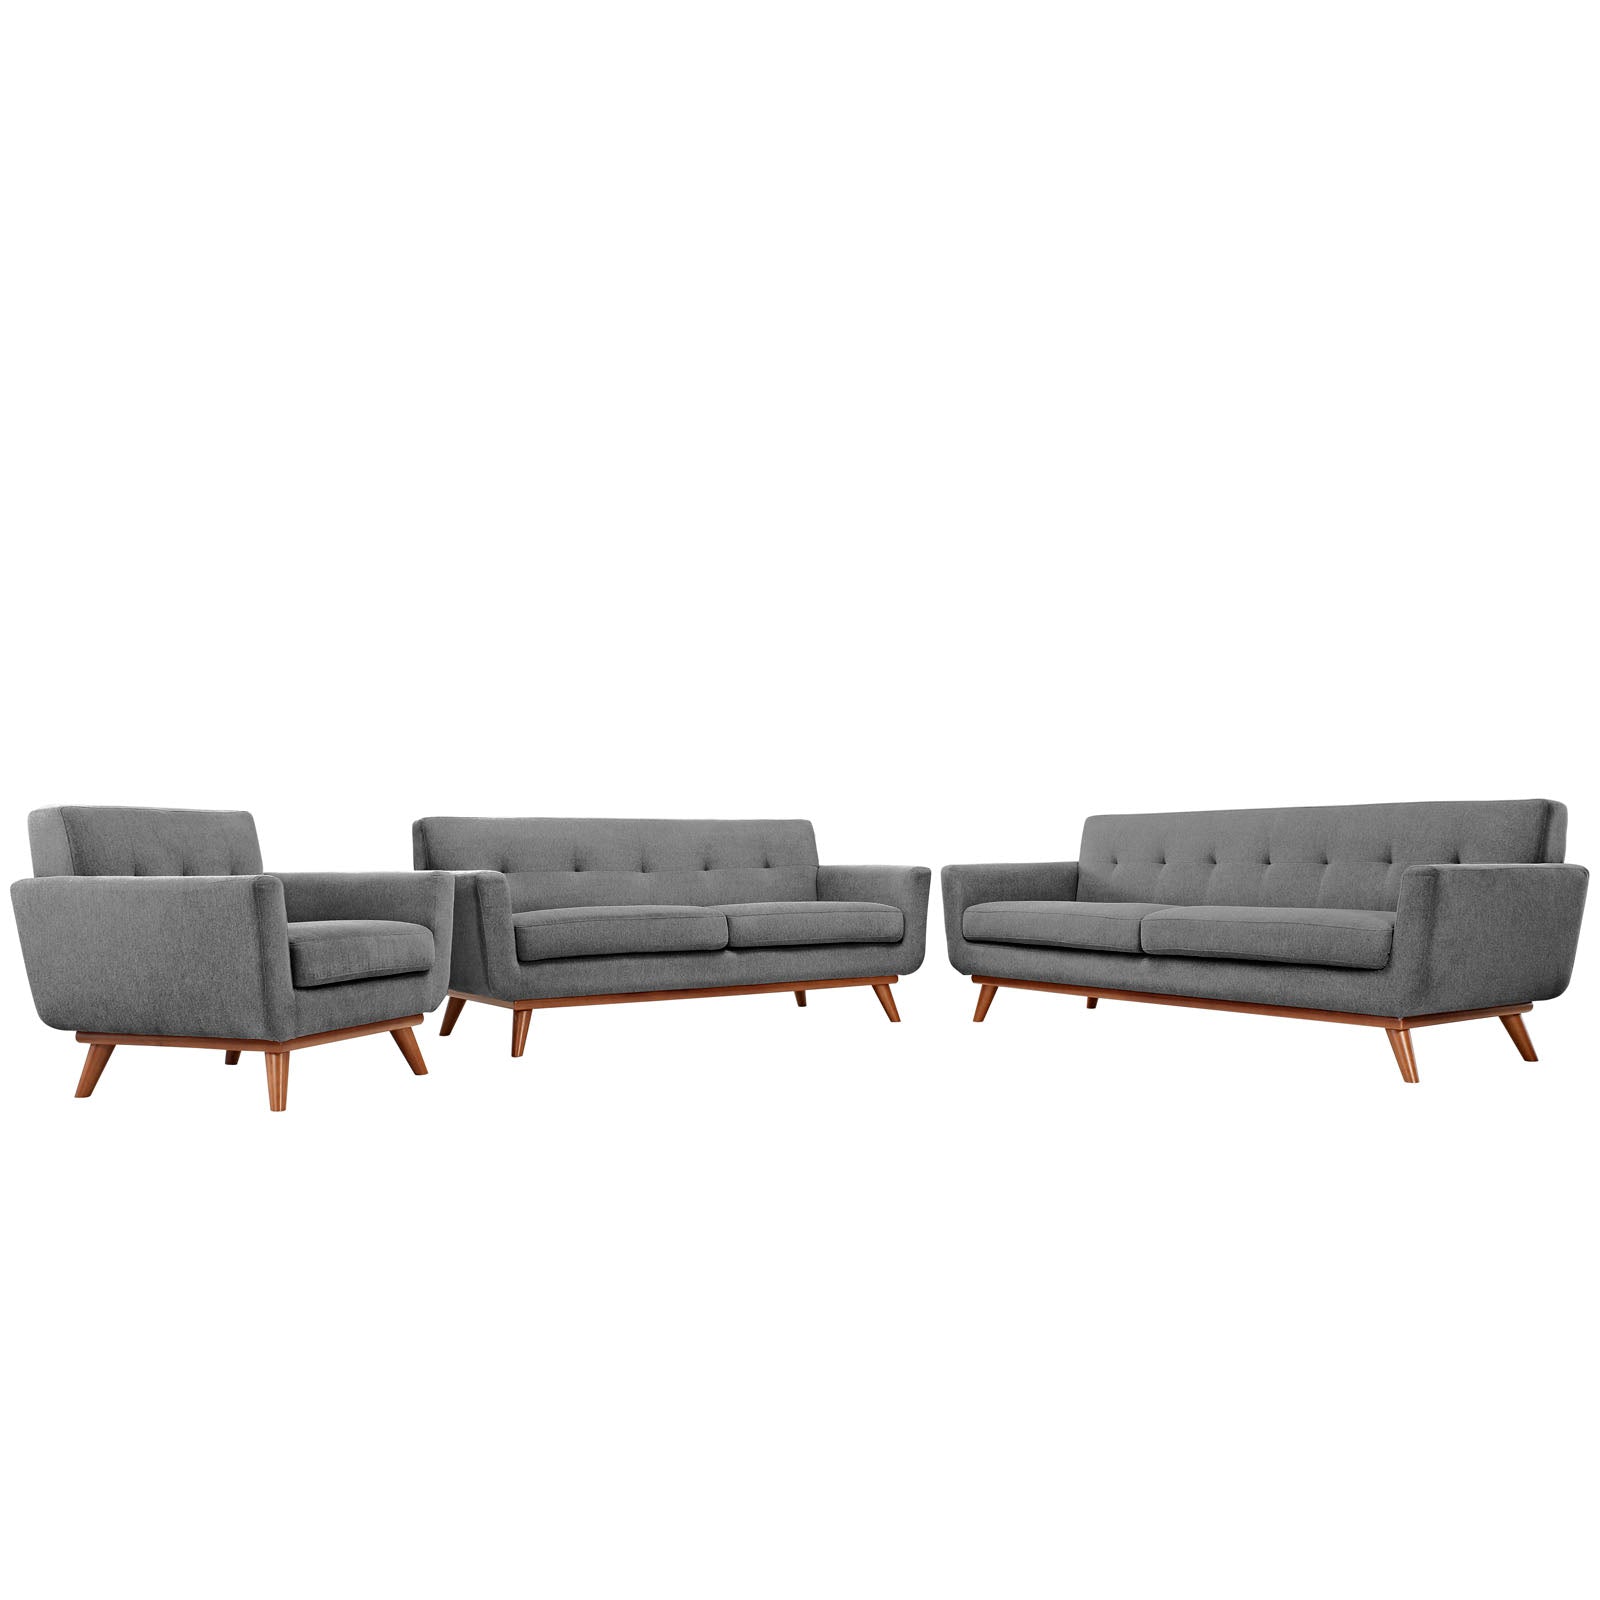 Modway Living Room Sets - Engage Sofa Loveseat and Armchair Set of 3 Expectation Gray